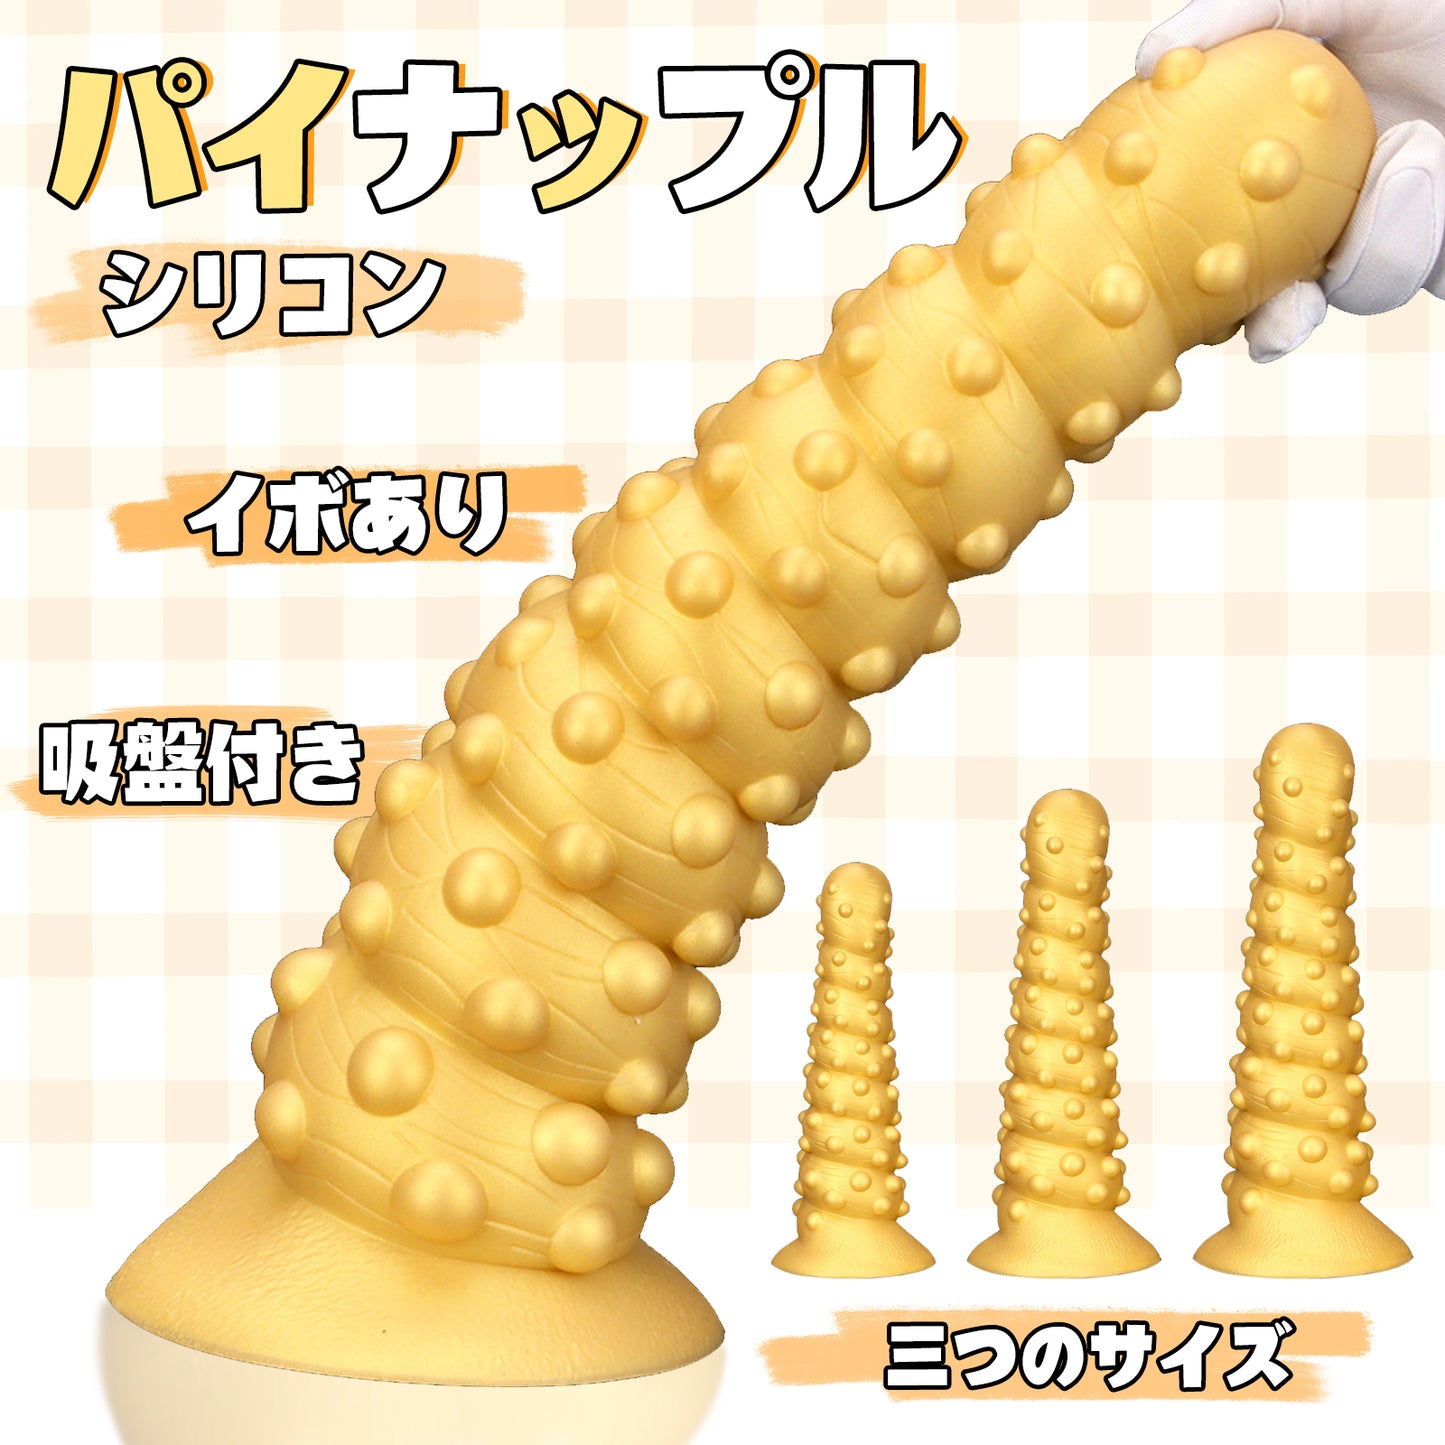 Maparon Pineapple Anal Plug Unevenness Gold with a wart